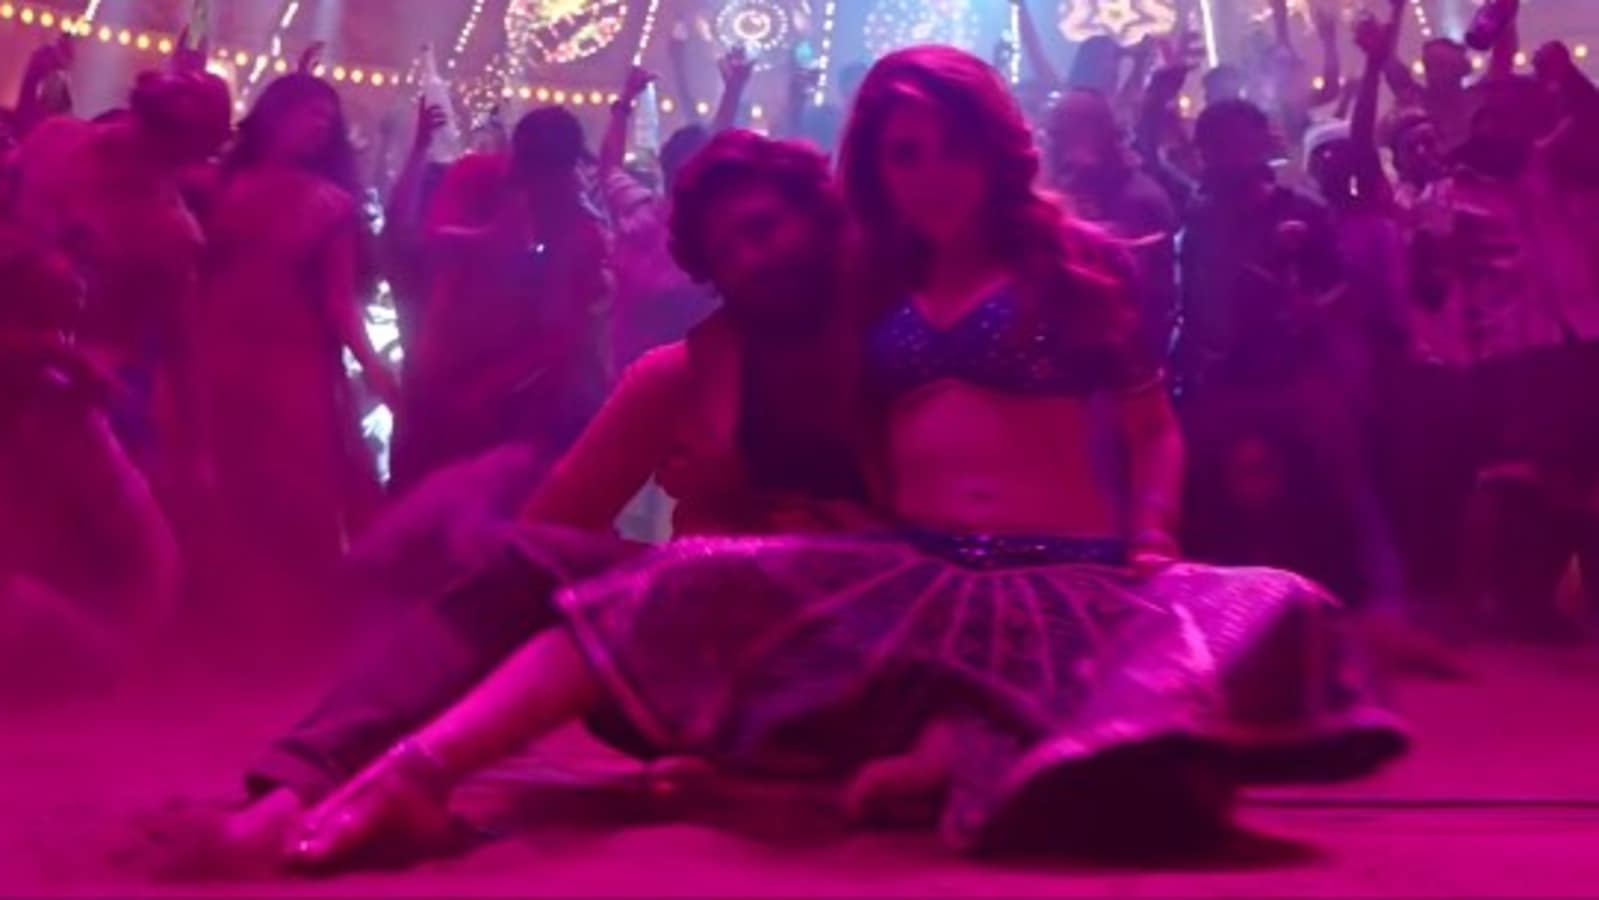 Samantha Ruth Prabhu and Allu Arjun groove to Pushpa&#39;s Oo Antava, fans say &#39;Sam is on fire&#39;. Watch song promo - Hindustan Times